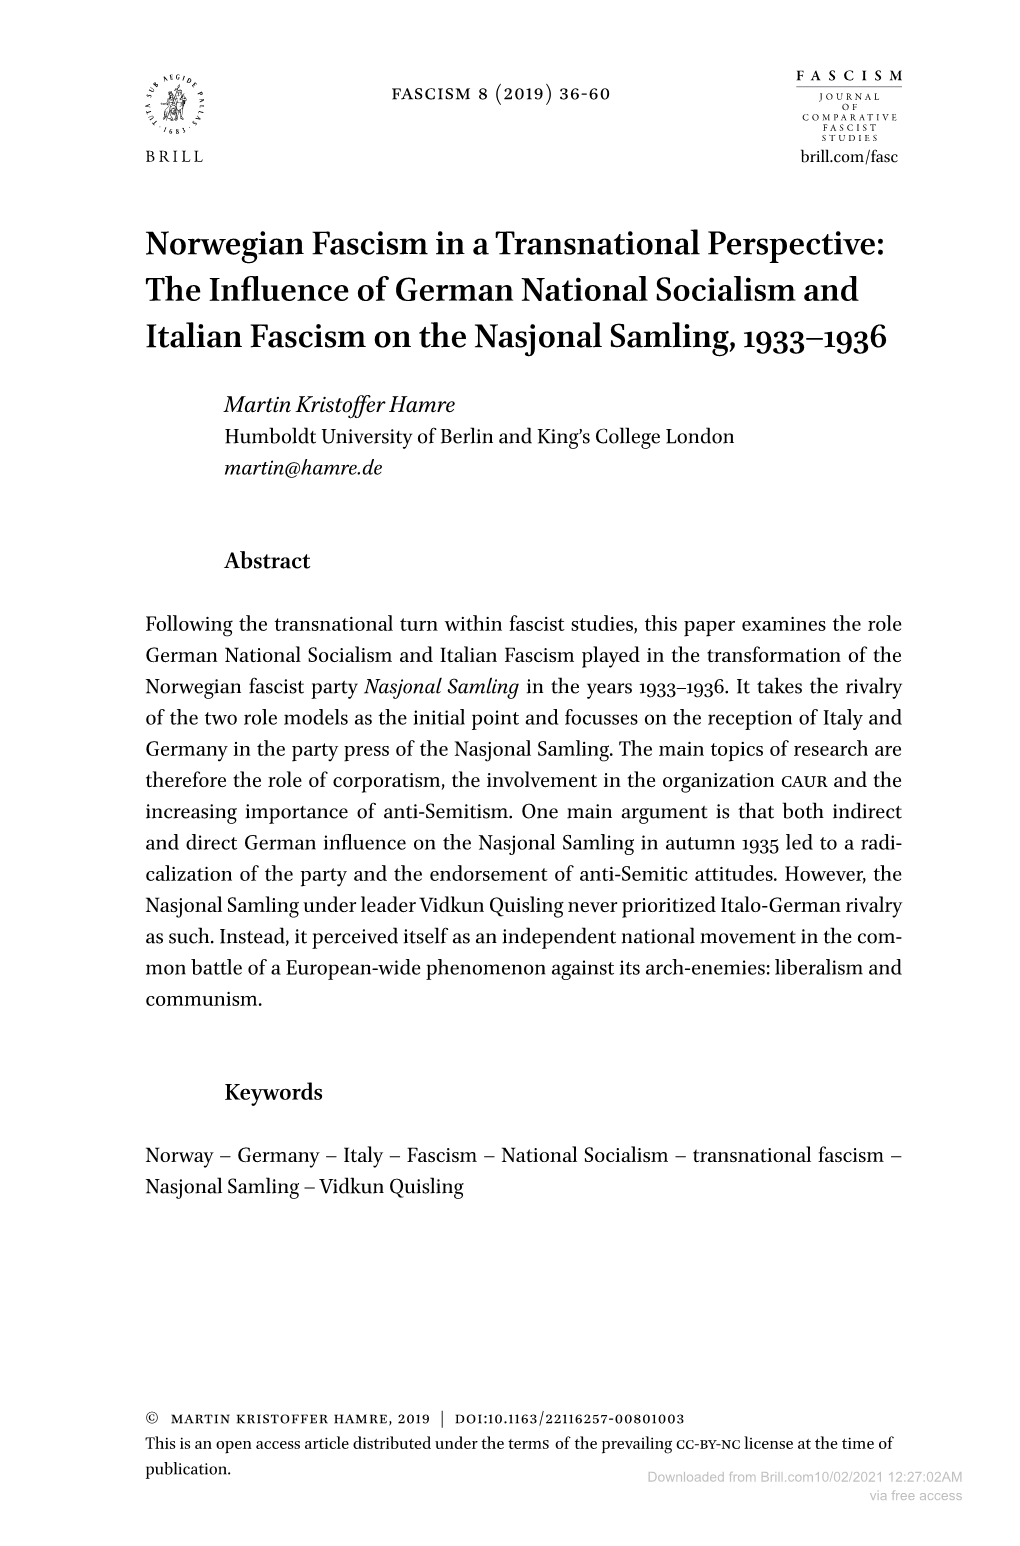 Norwegian Fascism in a Transnational Perspective: the Influence of German National Socialism and Italian Fascism on the Nasjonal Samling, 1933–1936